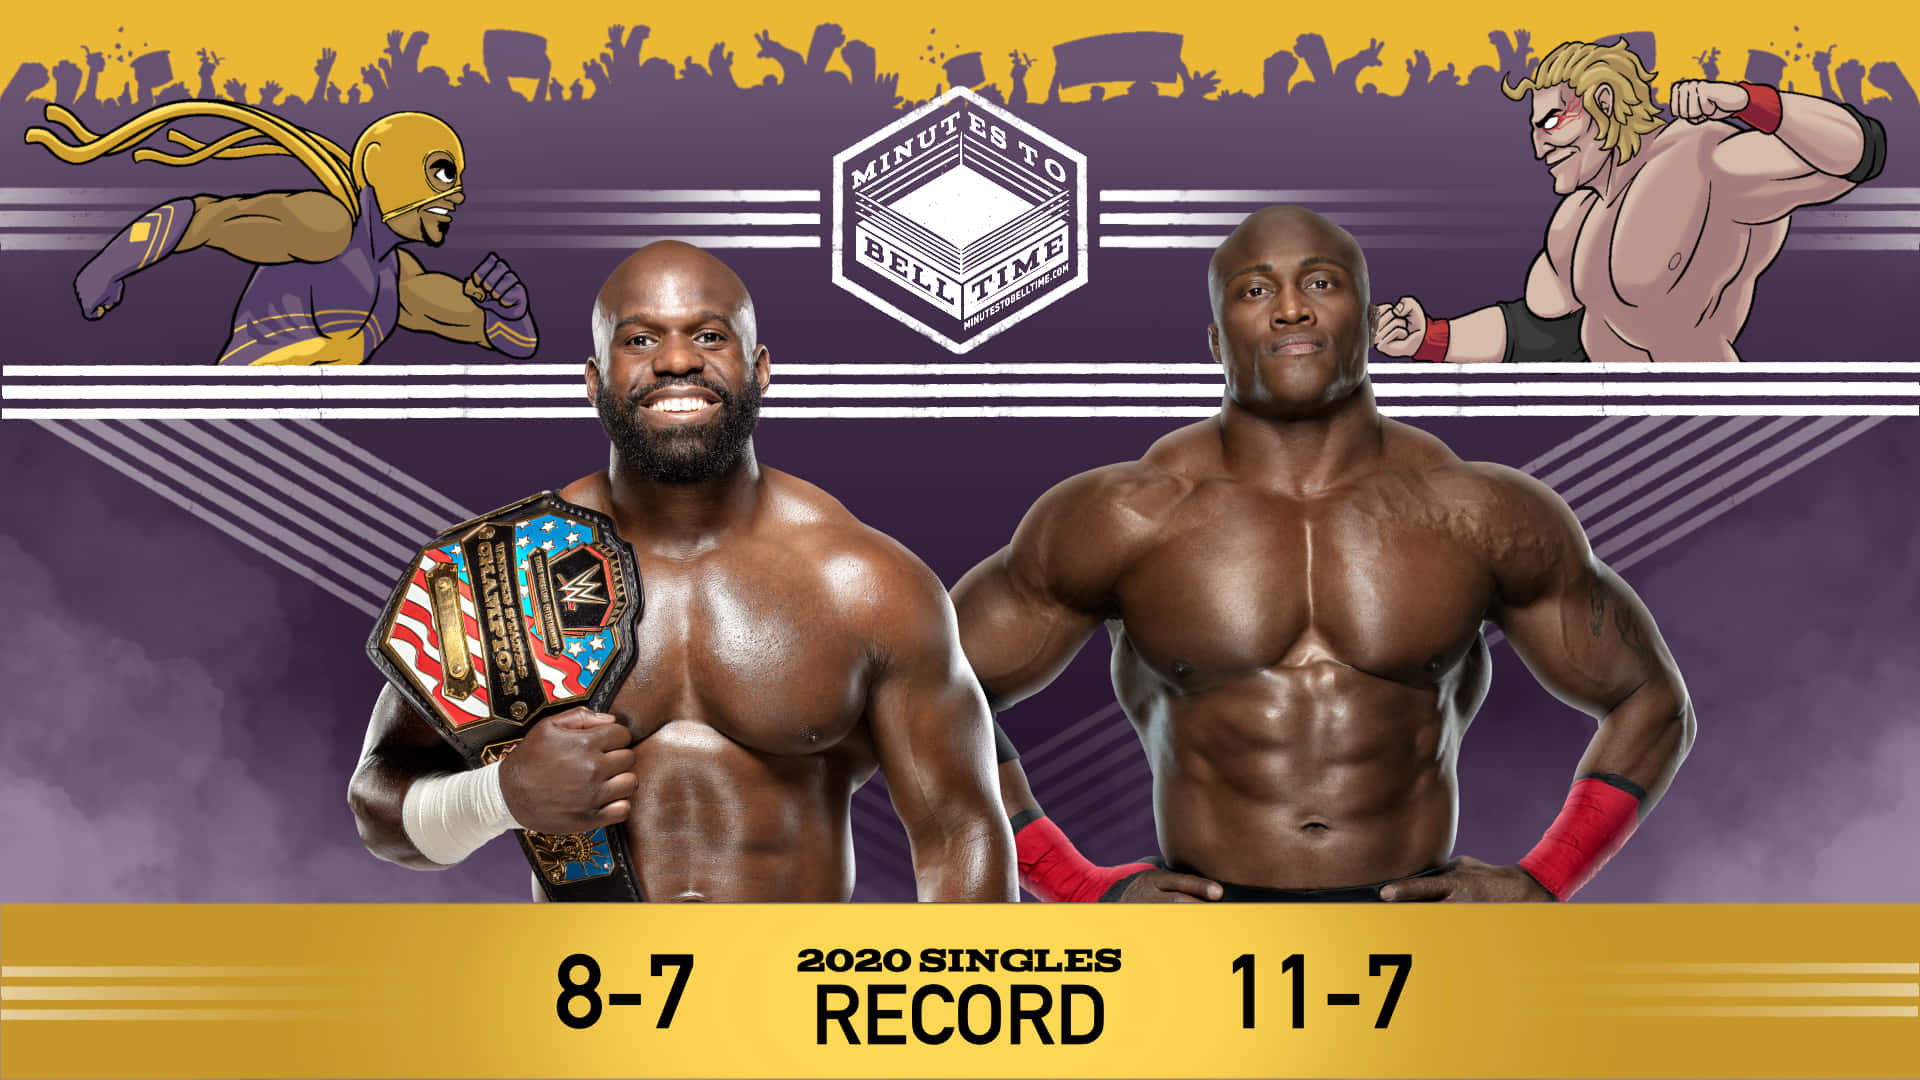 WWE Poster Featuring Bobby Lashley And Apollo Crews Wallpaper